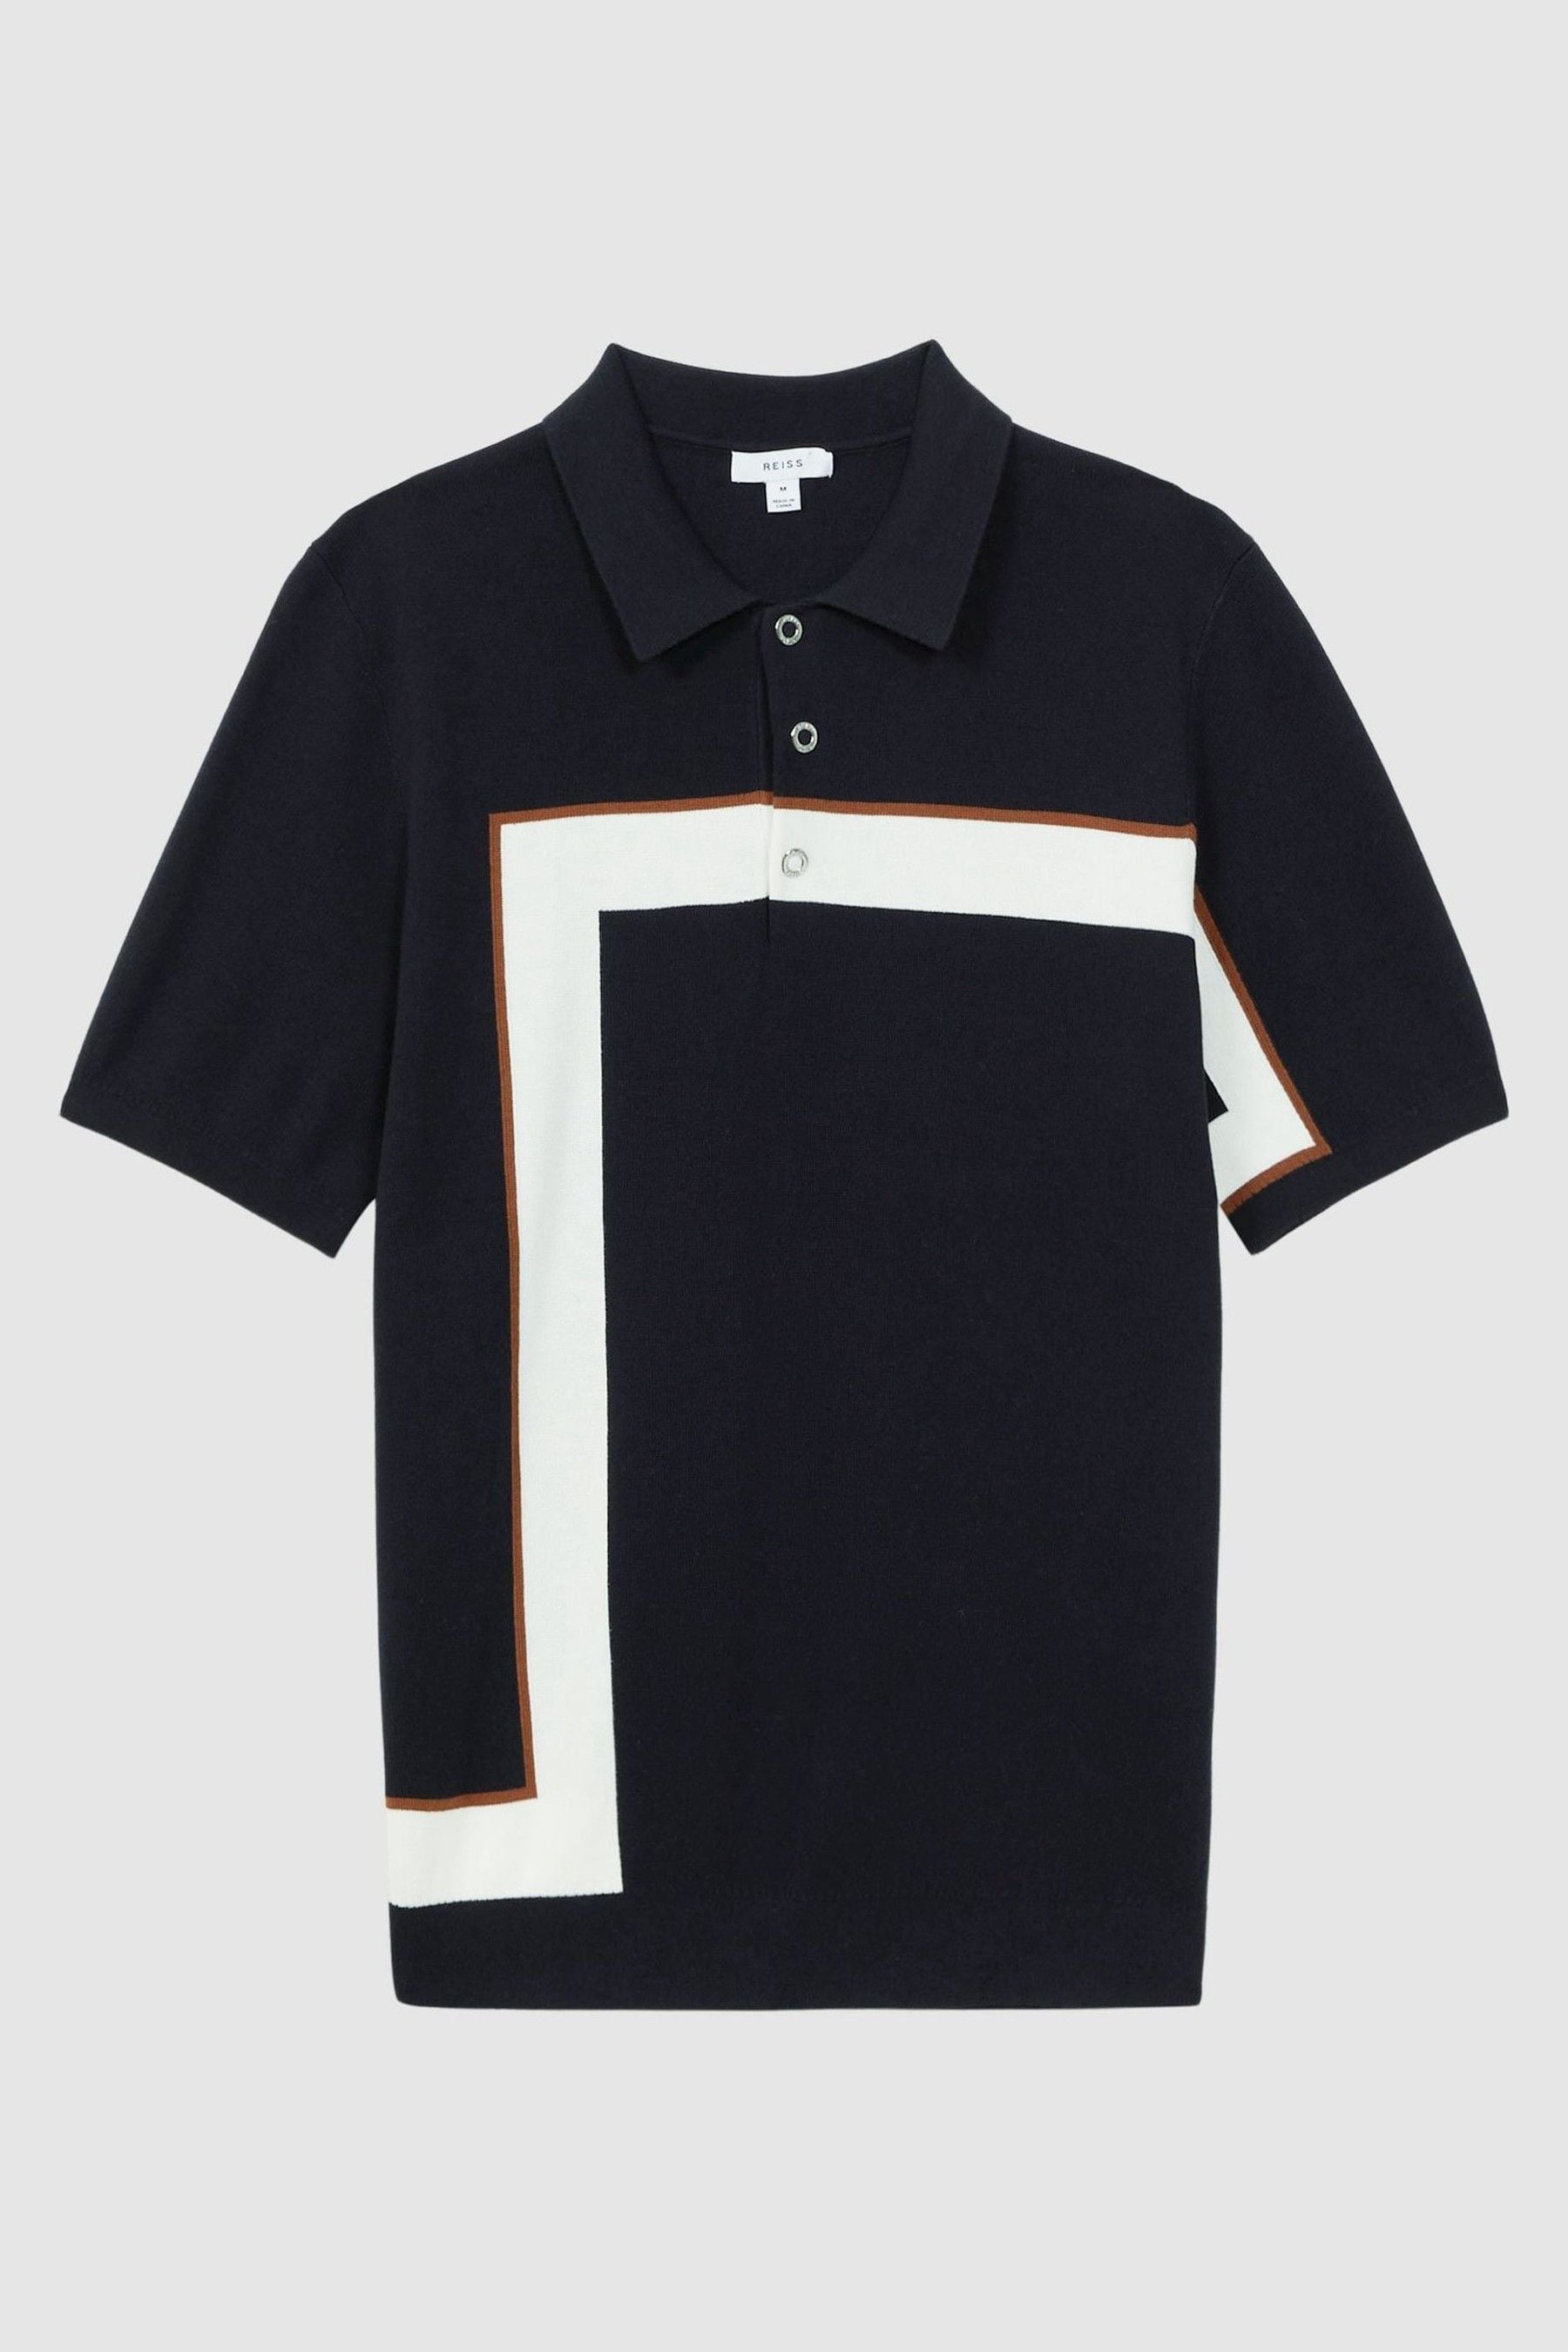 Buy Reiss Navy Bello Striped Polo T-Shirt from the Next UK online shop